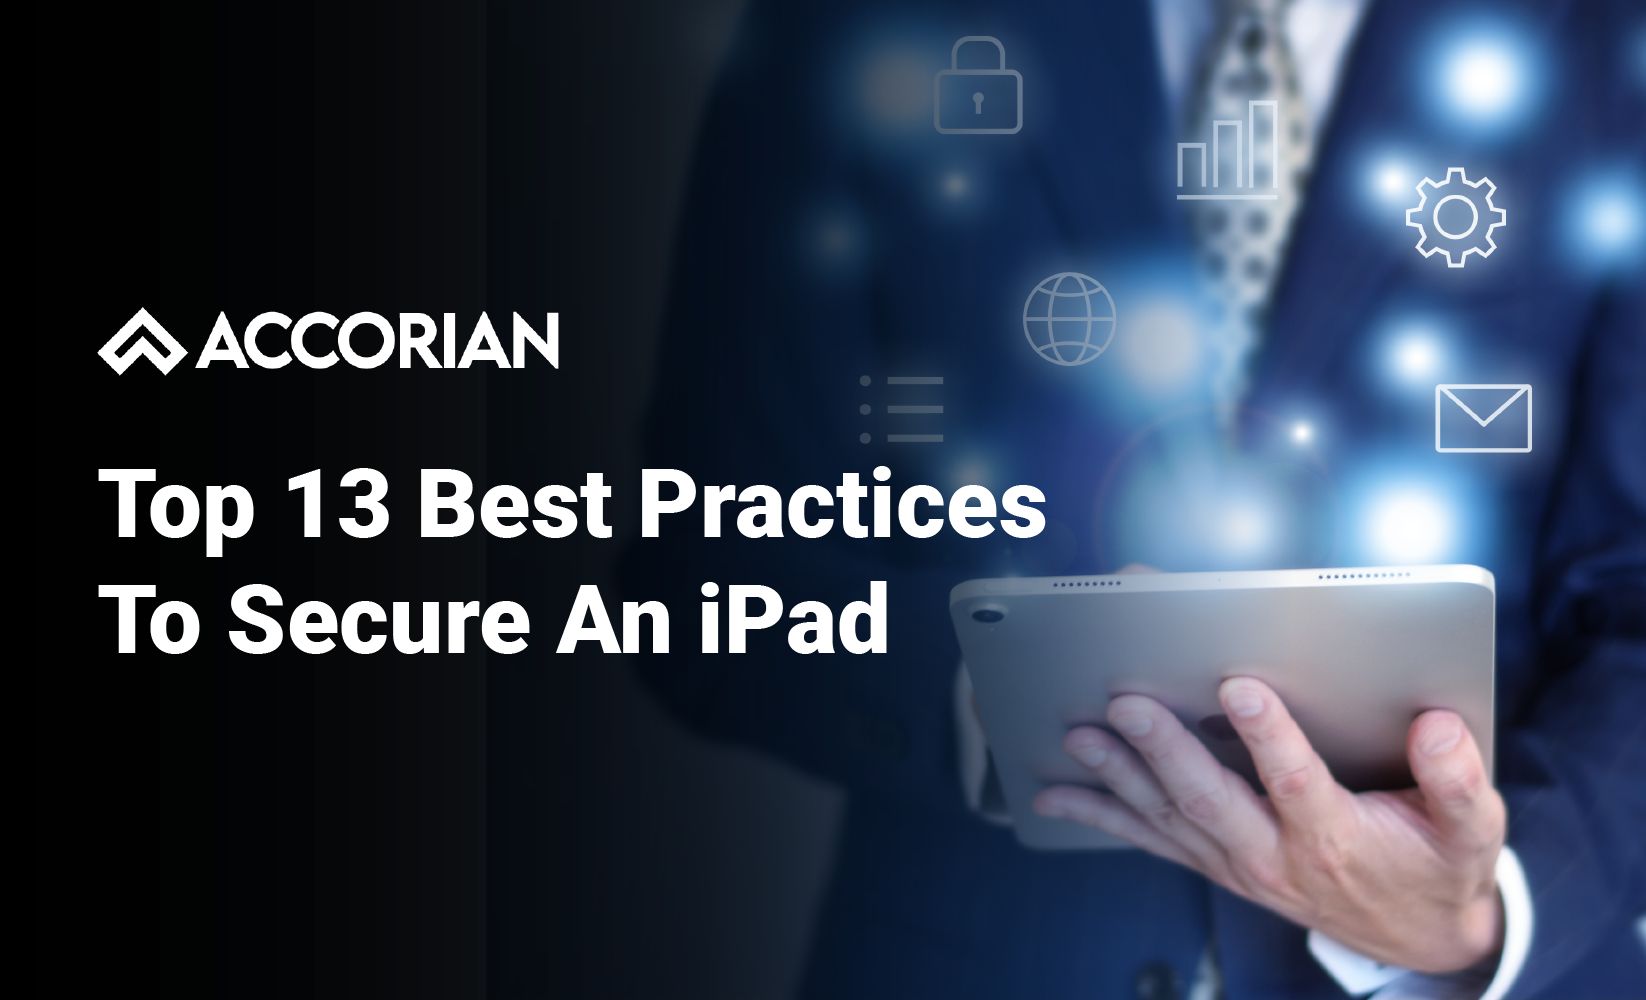 Top 13 Best Practices To Secure An iPad